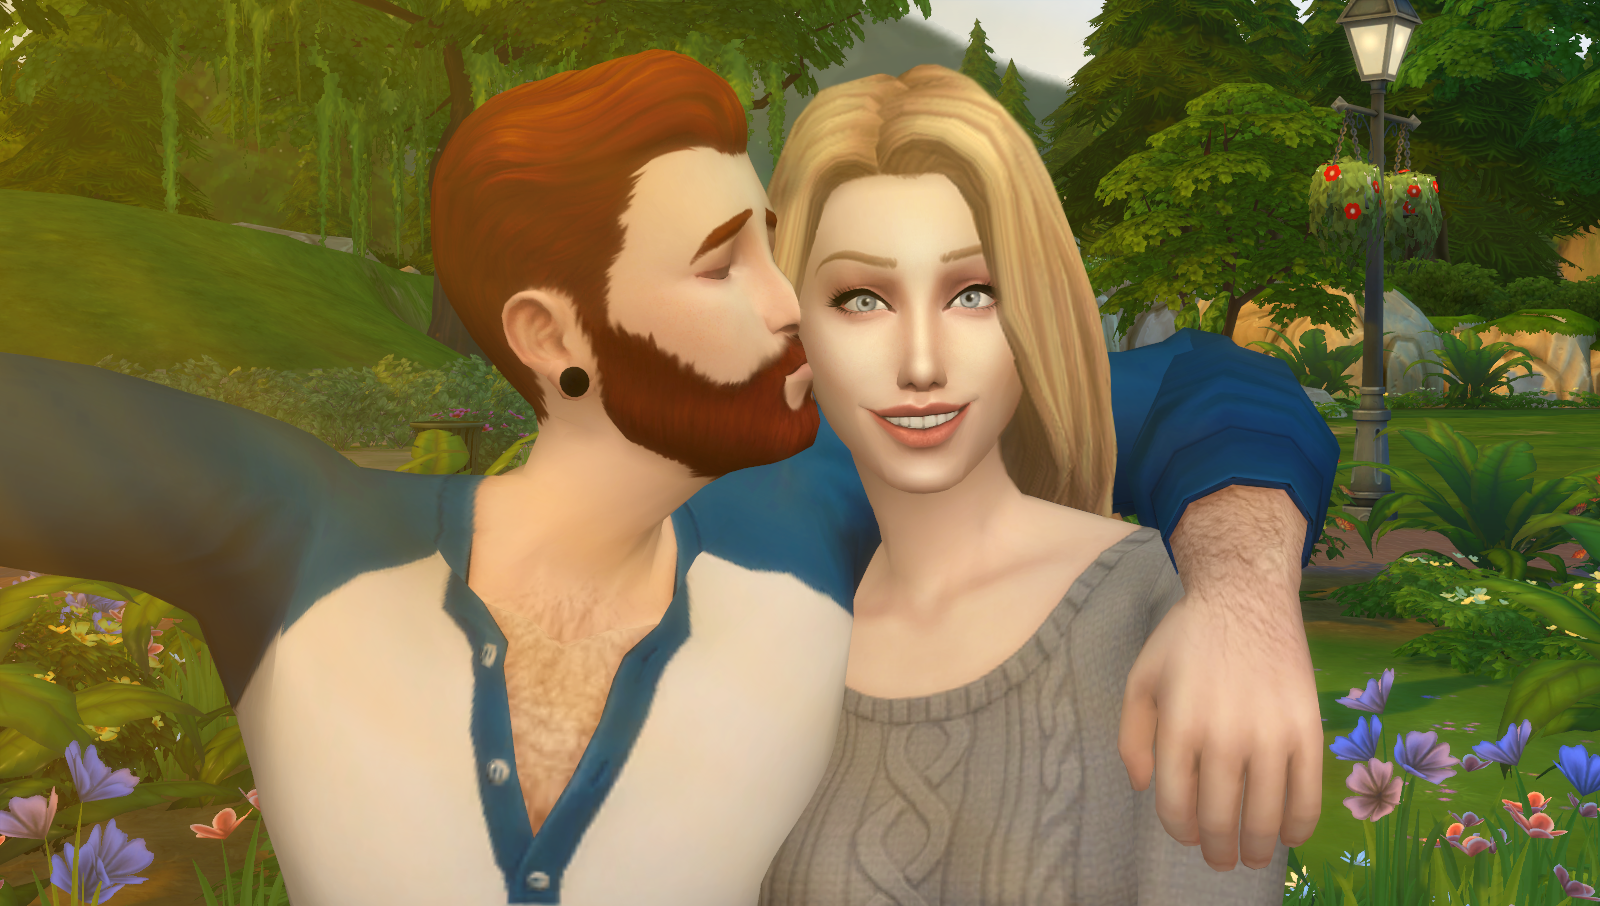 love 4 cc finds — mellouwsim: WE S'CUTE POSES PACK 4 Couple...